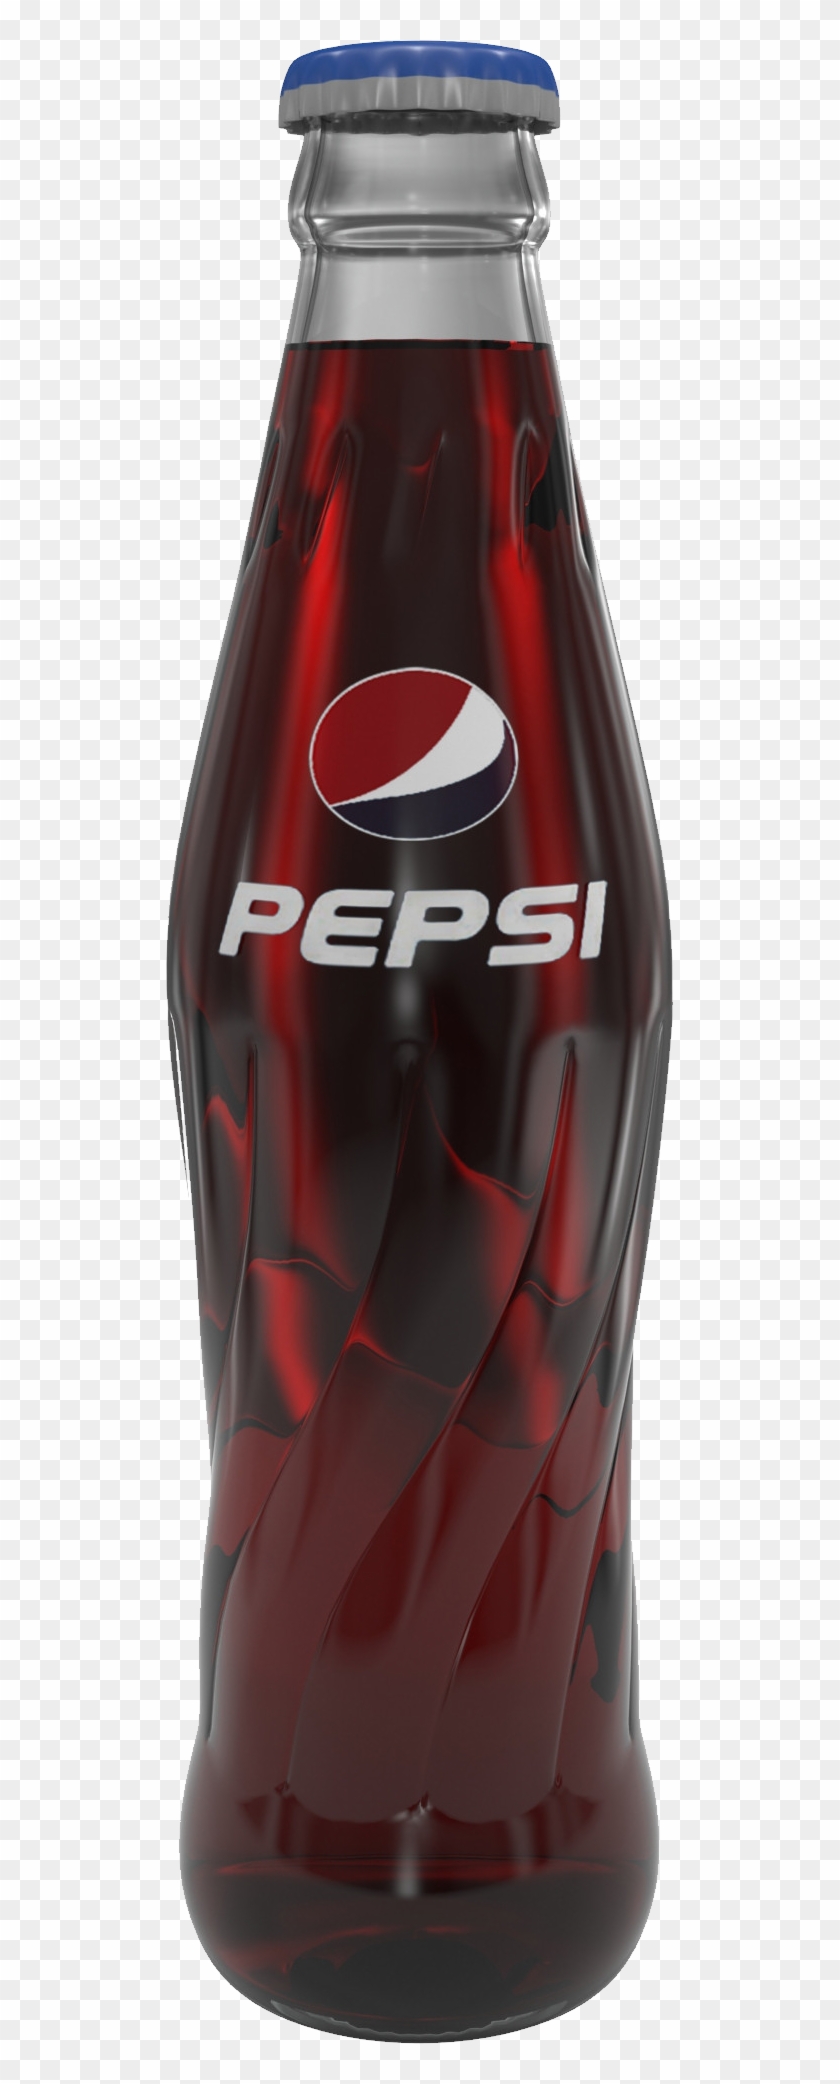 Pepsi Bottle Png Image - Pepsi .png Clipart